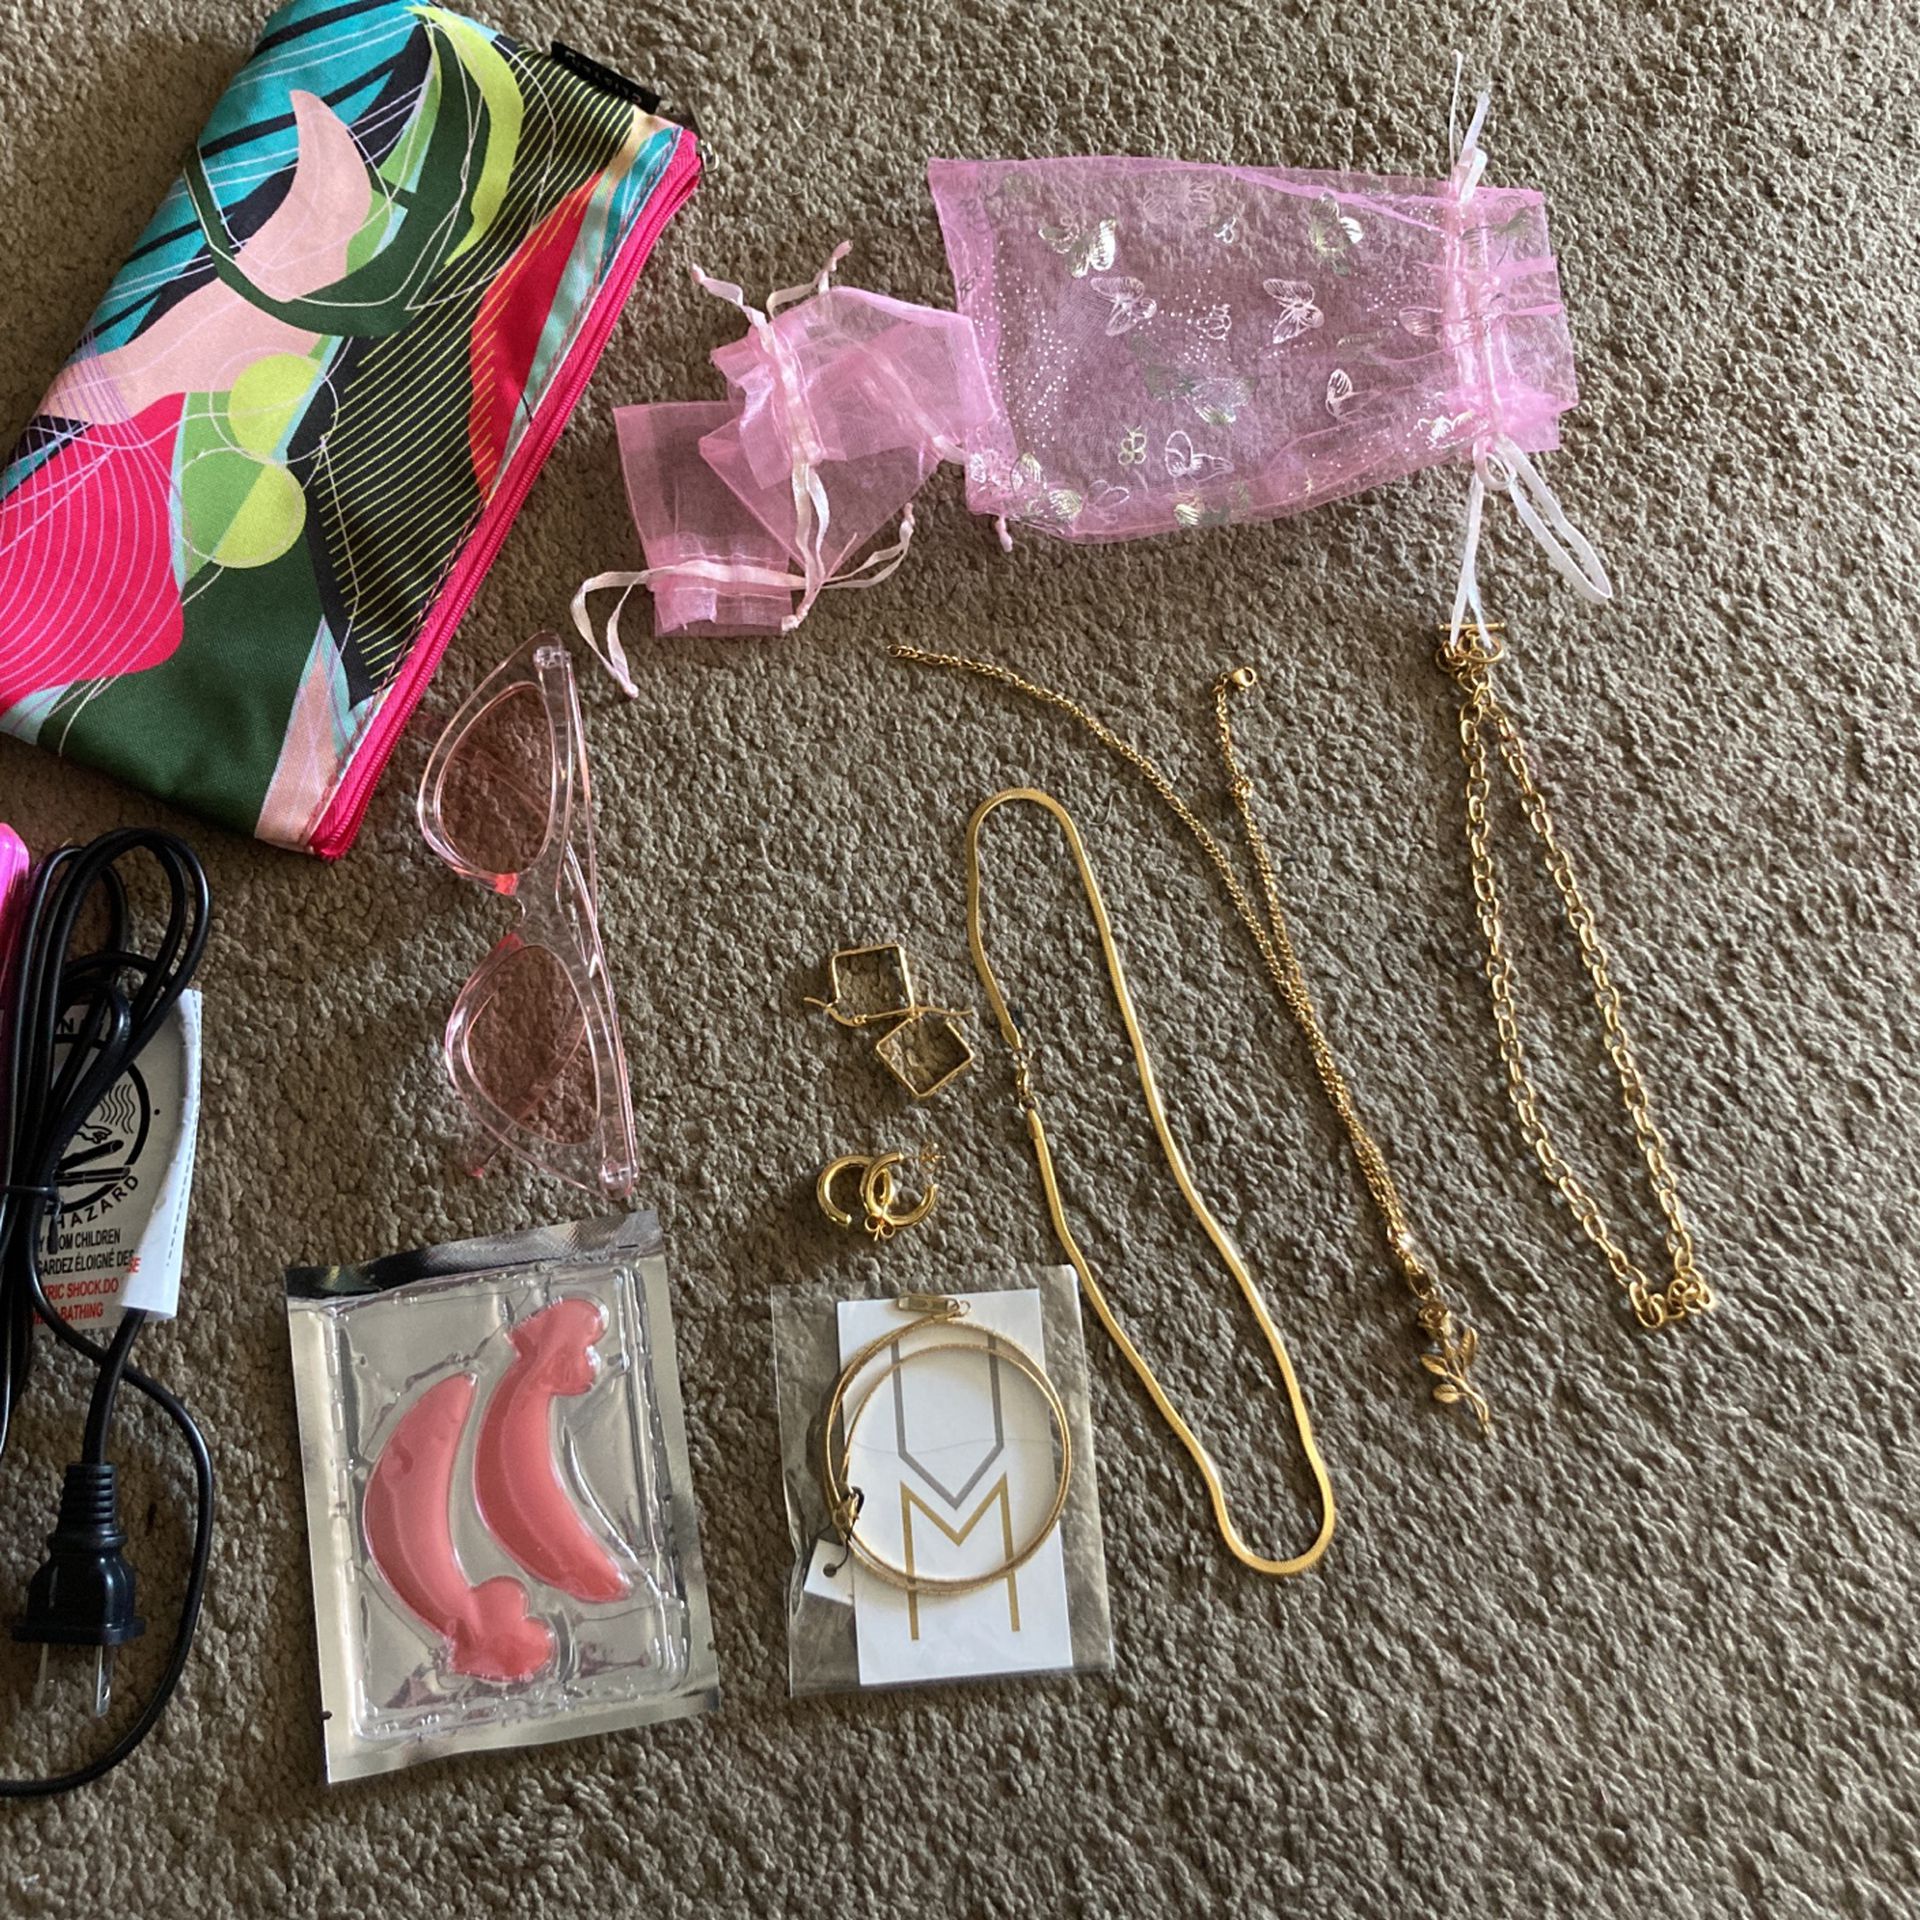 Brand New: Mini Hair Straightener + Eye Candy Collagen Eyepatch + Pink Glasses + 3 Different Pairs Of Earings + 3 Different Necklaces 